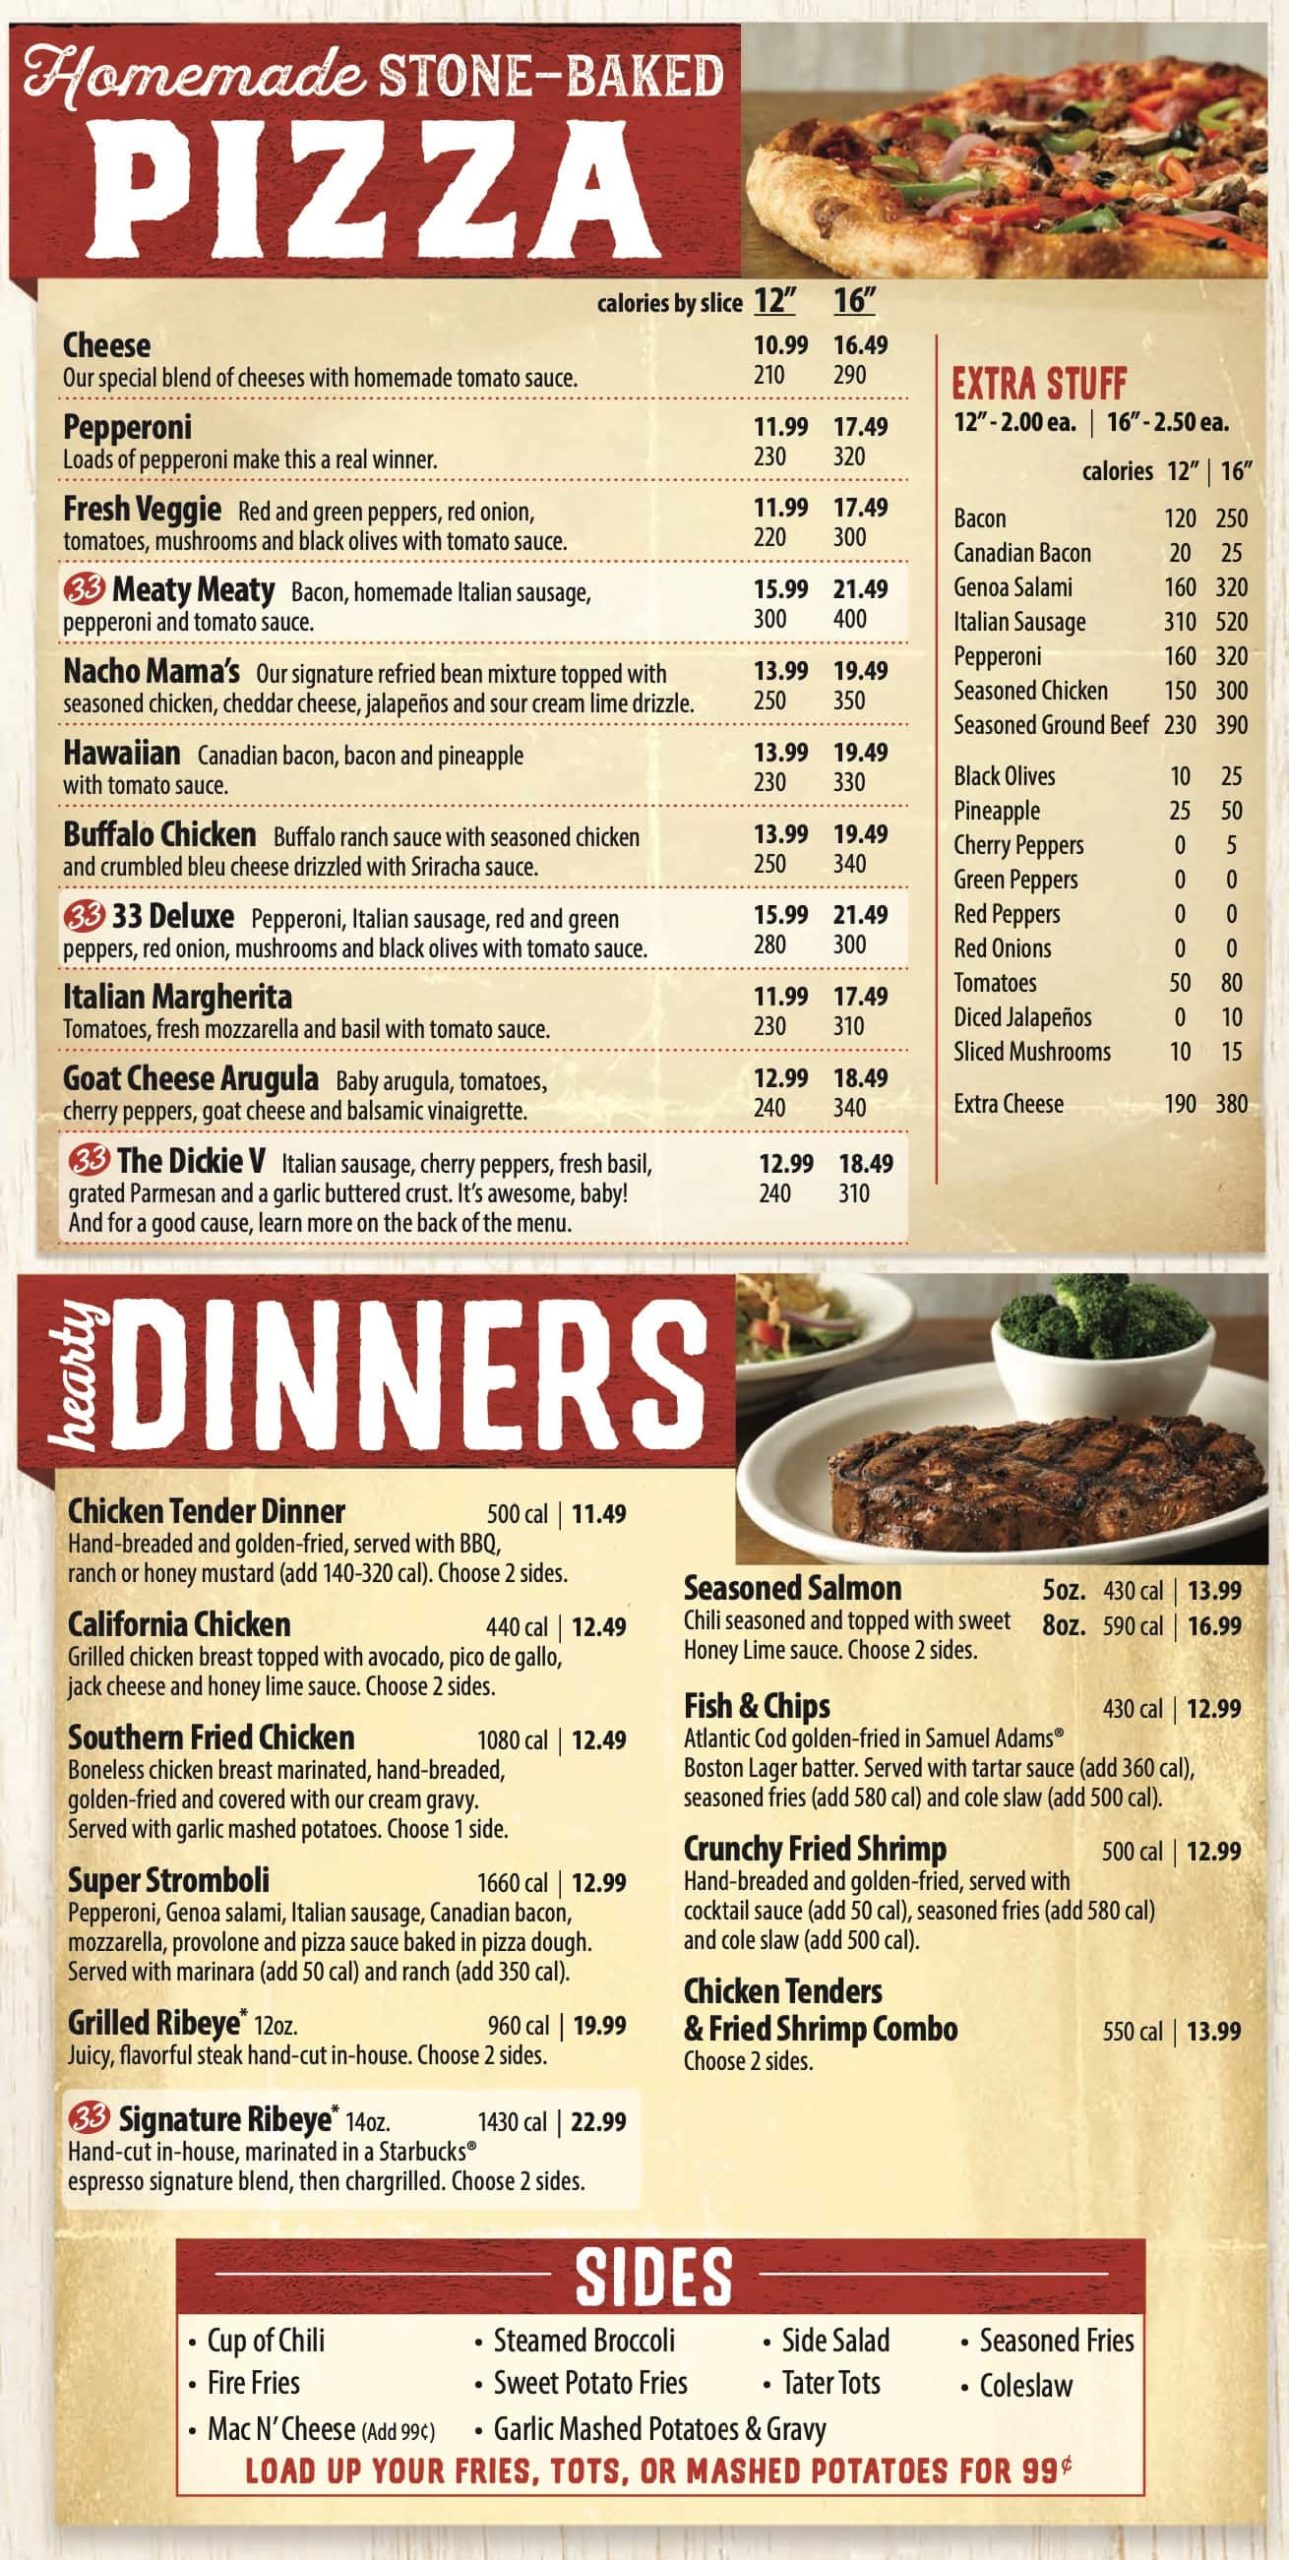 Bubba's 33 Menu With Prices